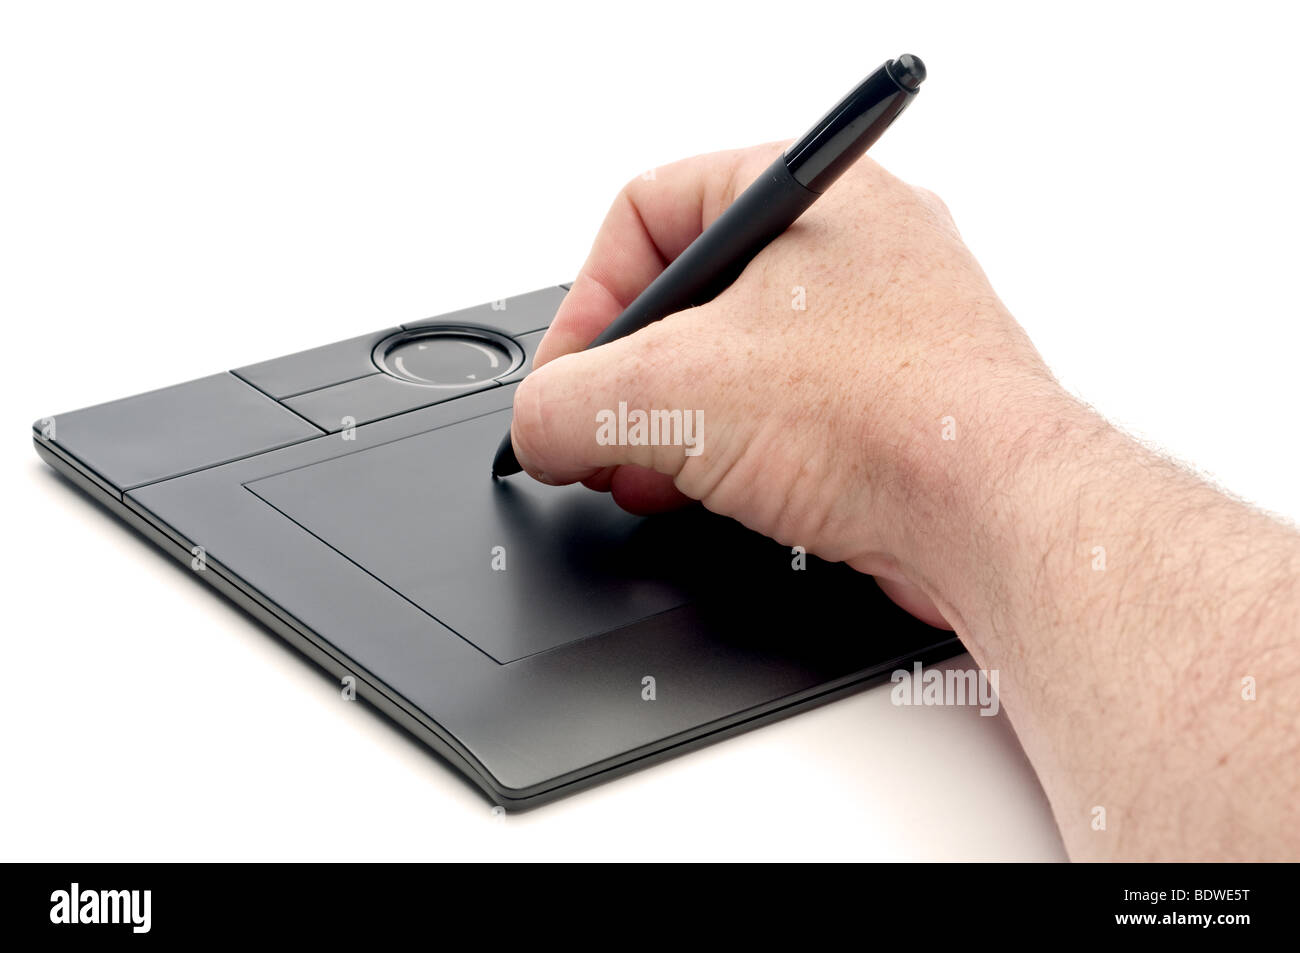 A male hand operating a pen computer input device Stock Photo